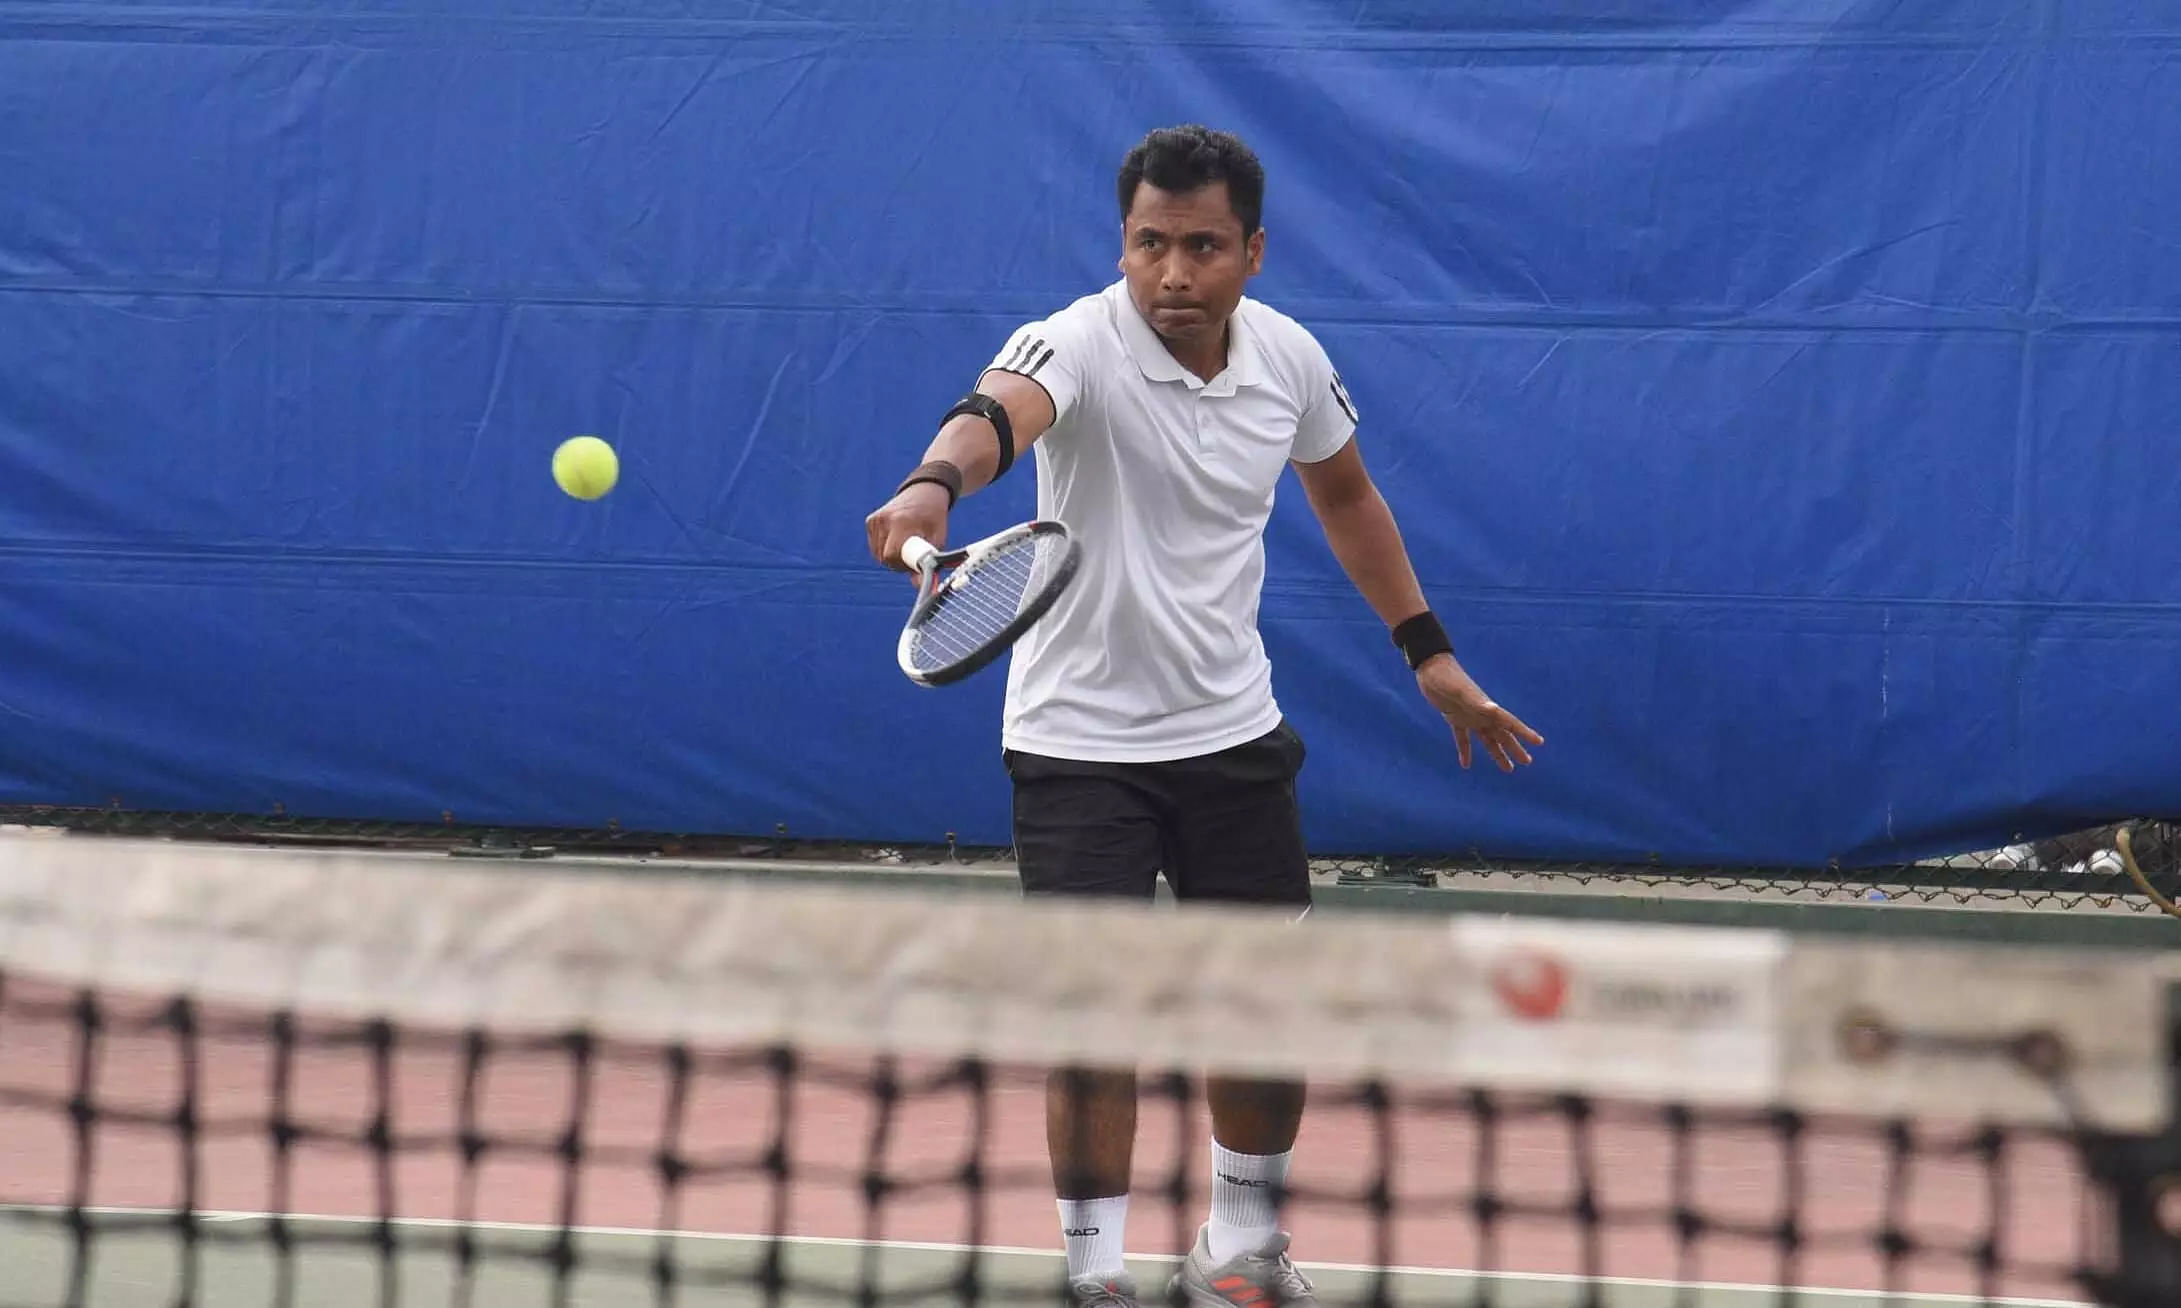 IOCL to face ONGC in final of the 40th PSPB Lawn Tennis Tournament